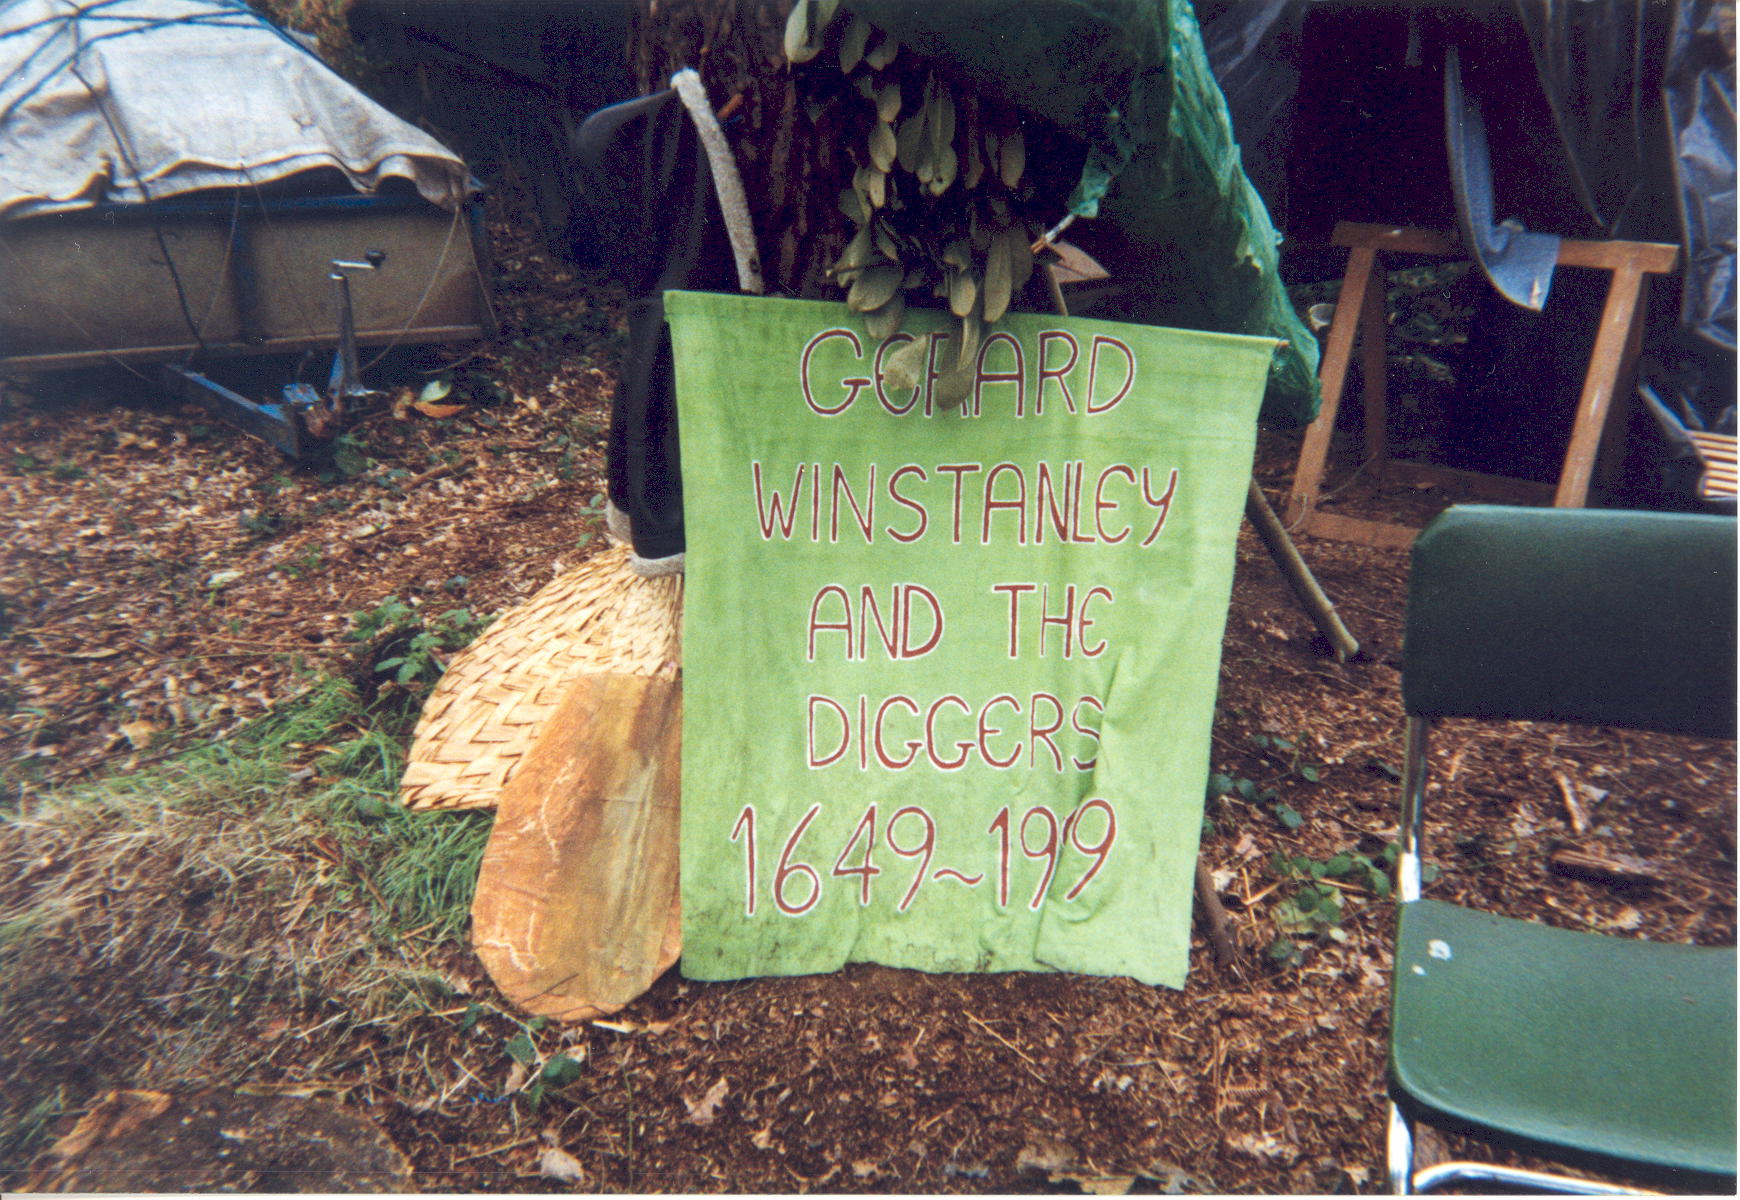 Photograph showing a green cloth banner inscribed in red: 